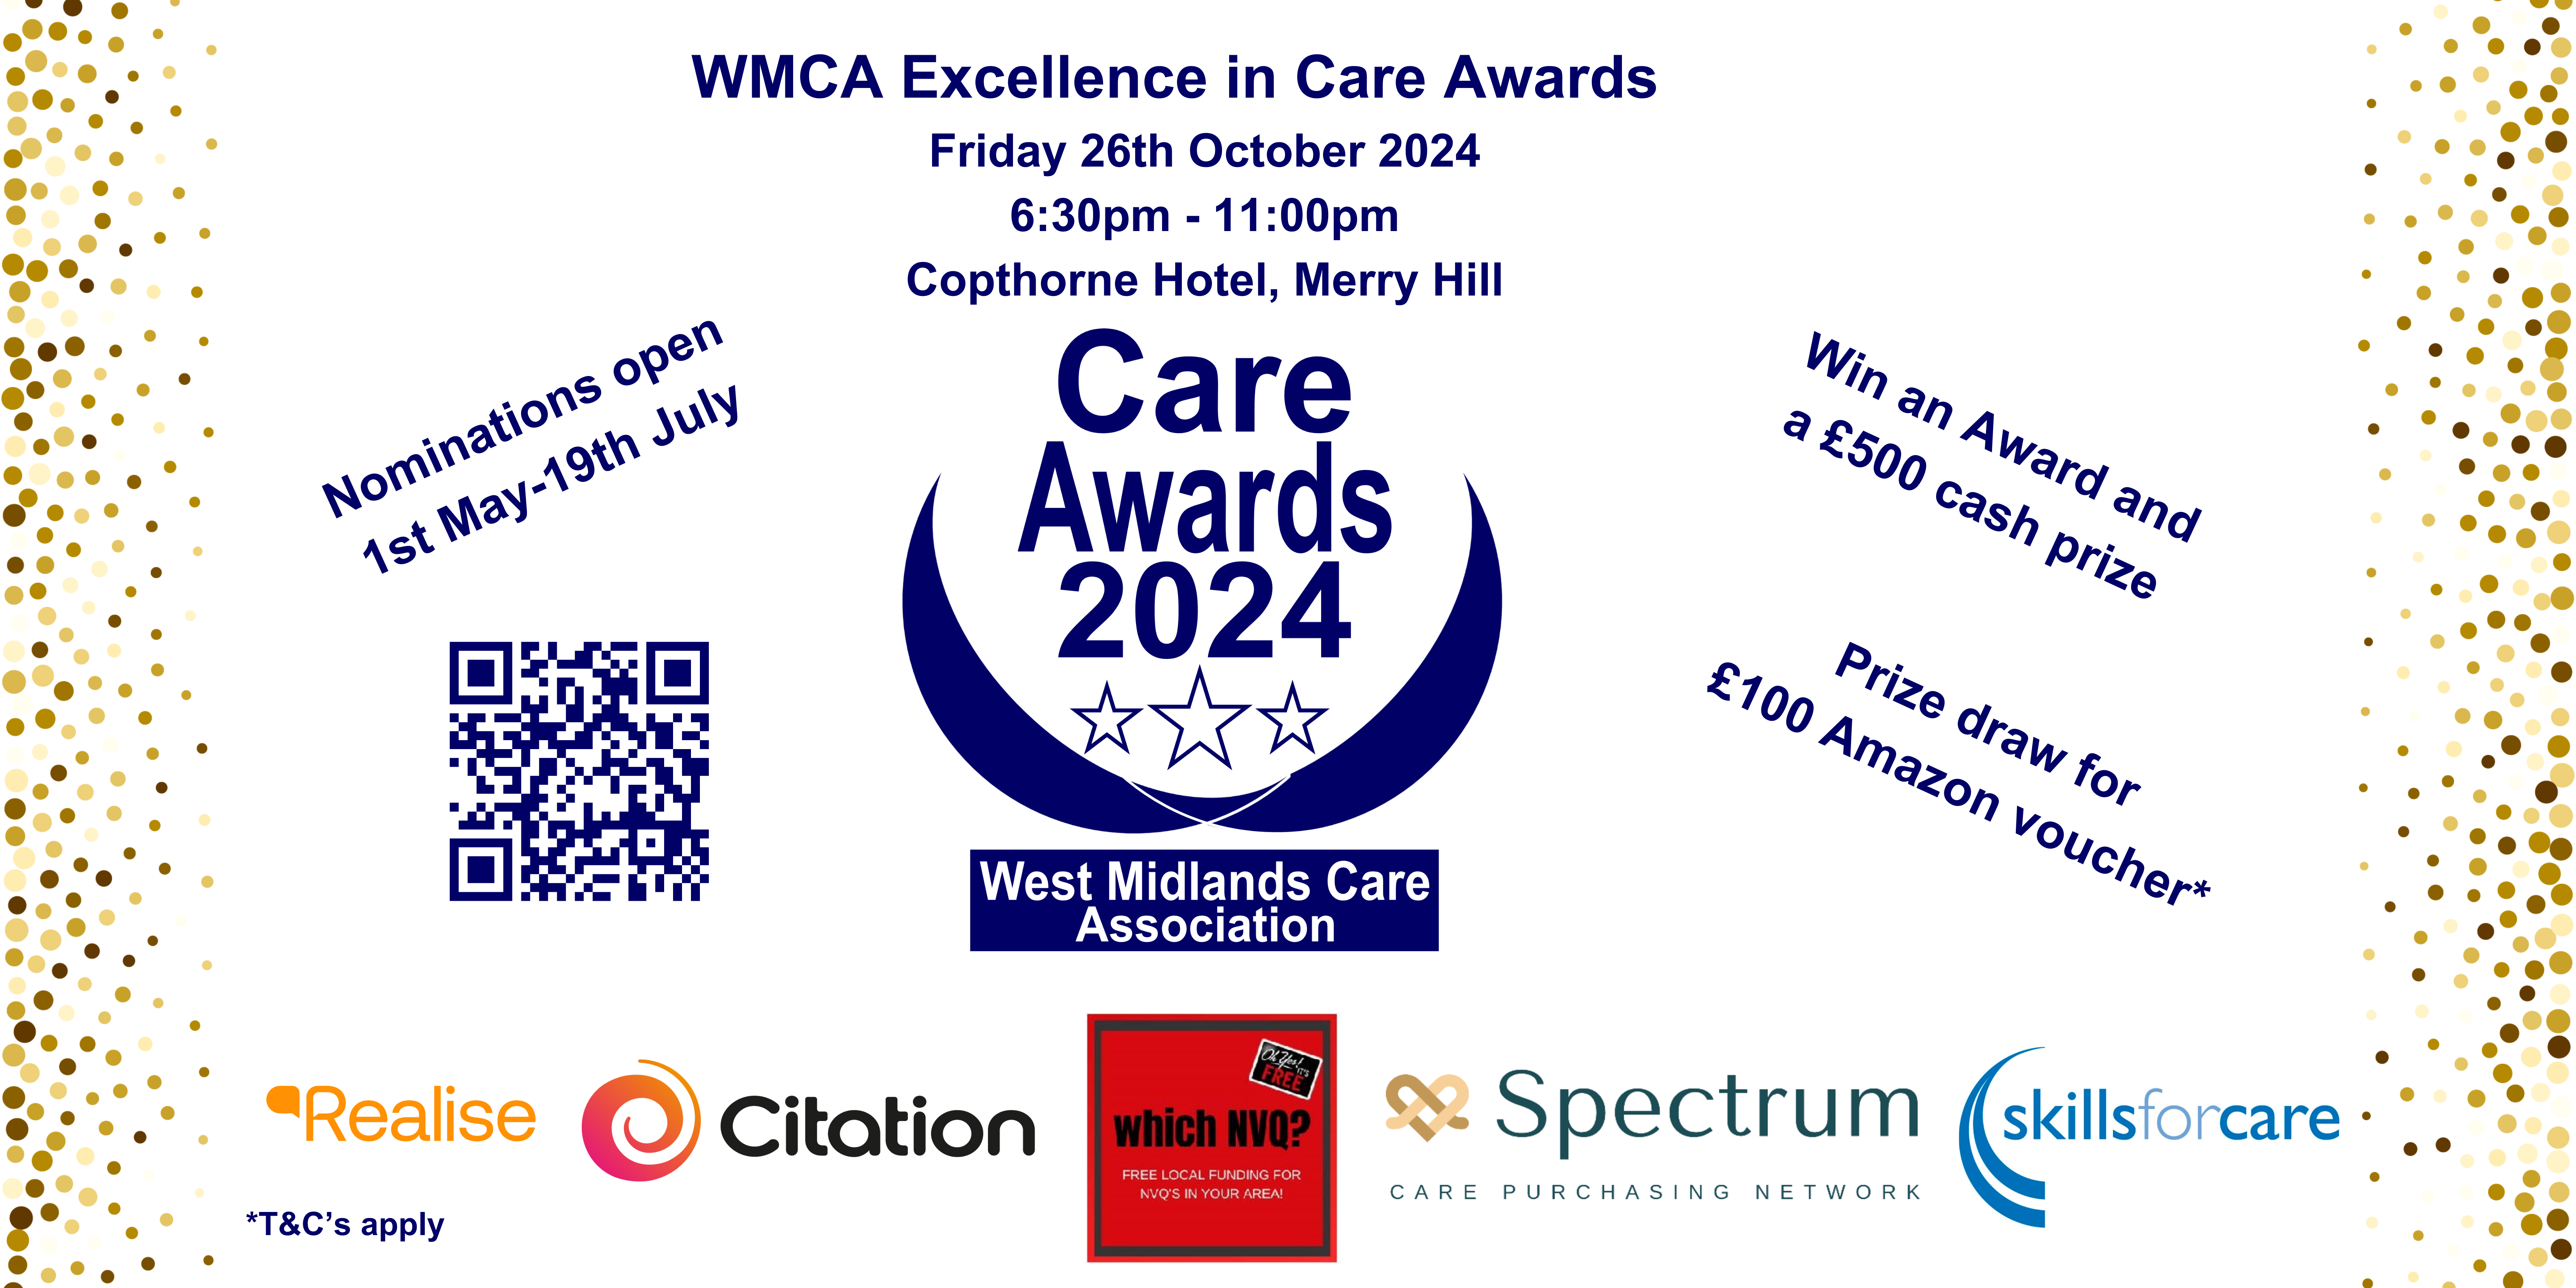 https://stratus.campaign-image.eu/images/32883000016157852_zc_v1_1716306102963_wmca_excellence_in_care_awards_newsletter_banner_(1).png